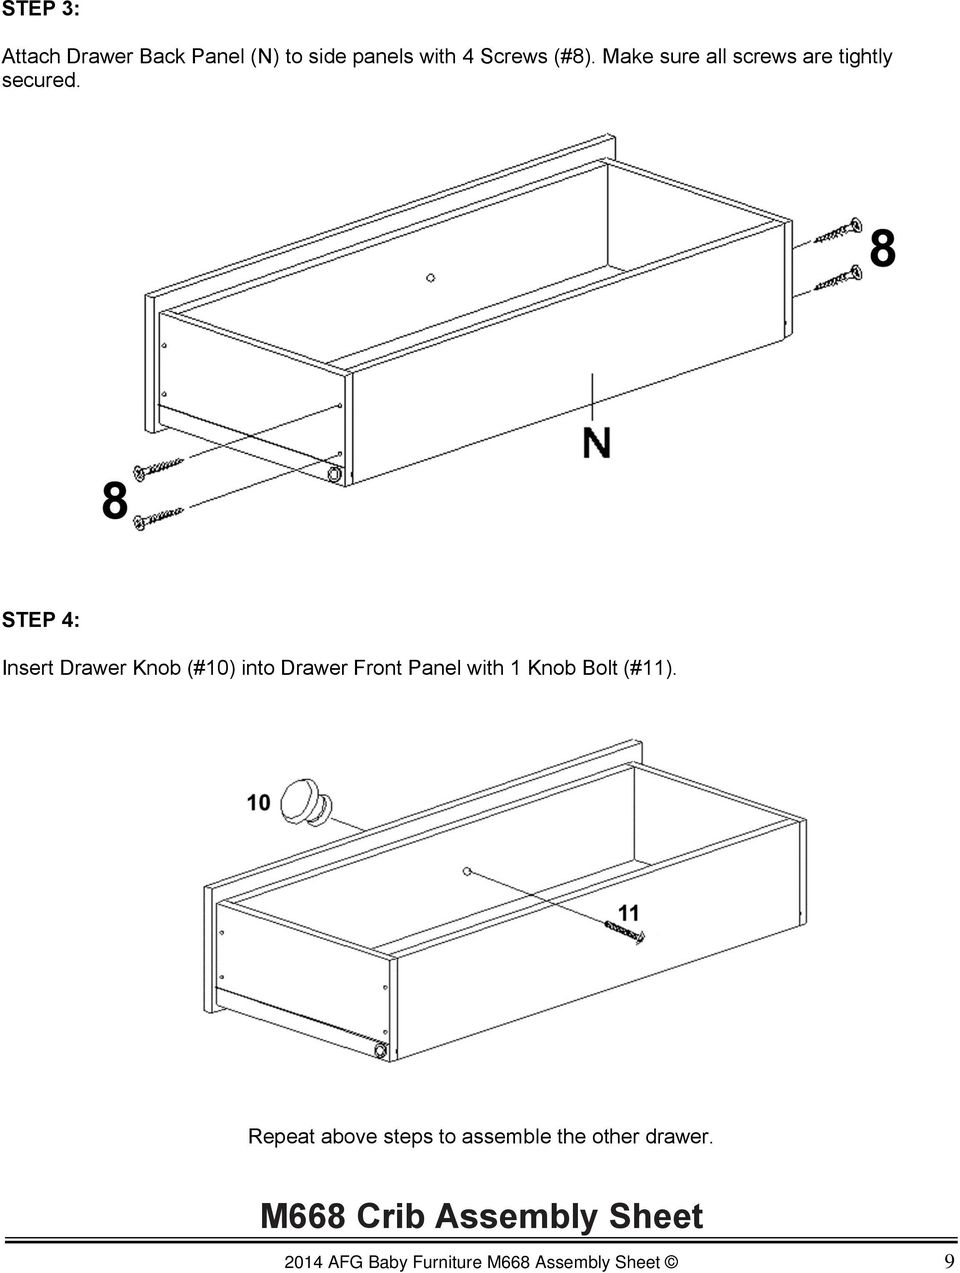 STEP 4: Insert Drawer Knob (#10) into Drawer Front Panel with 1 Knob Bolt